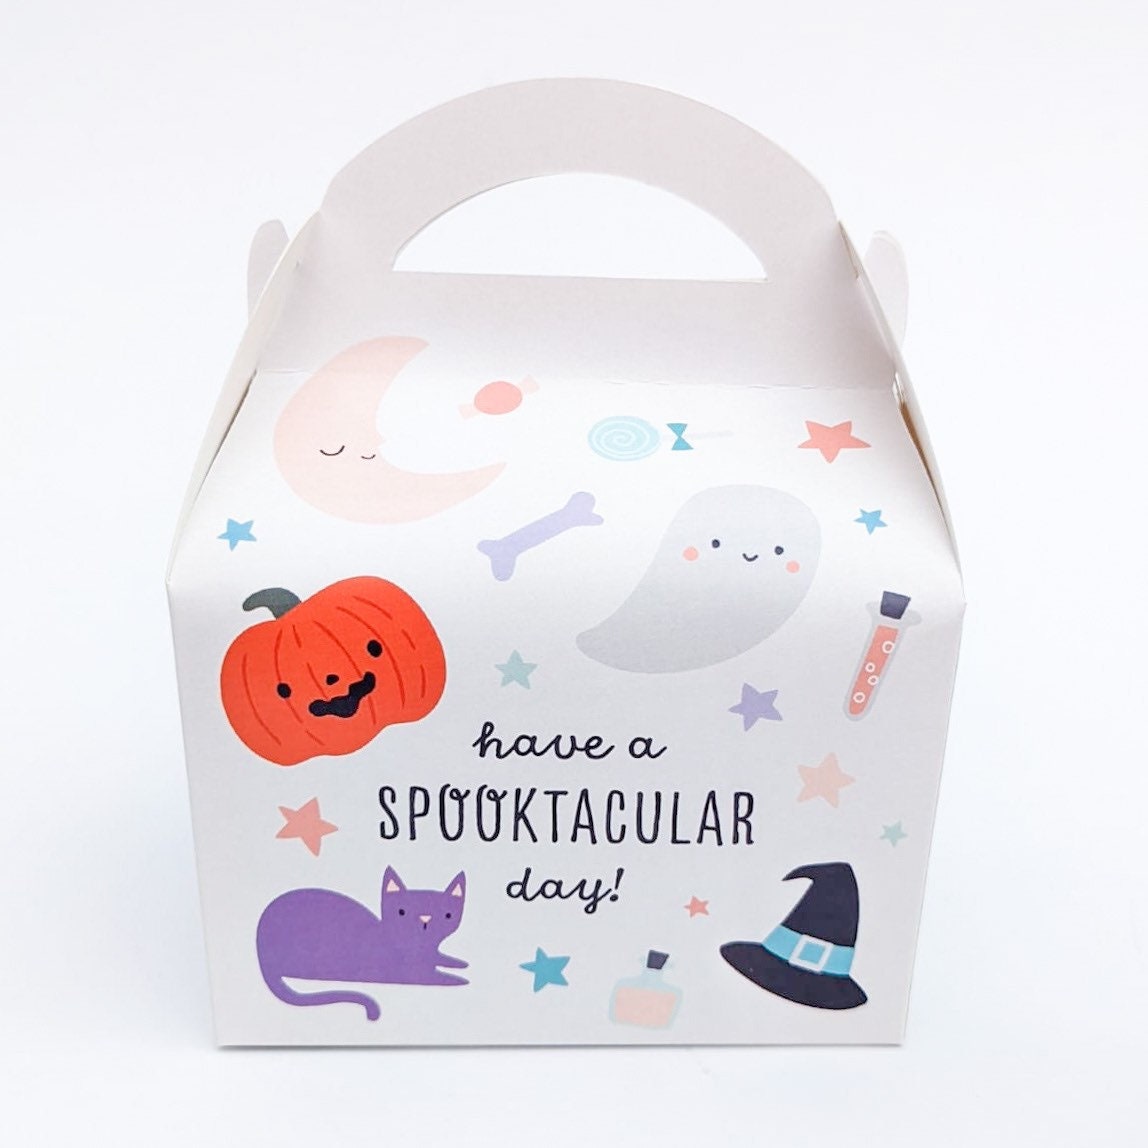 HALLOWEEN Spooky watercolor Personalised Children’s Party Box Gift Bag Favour